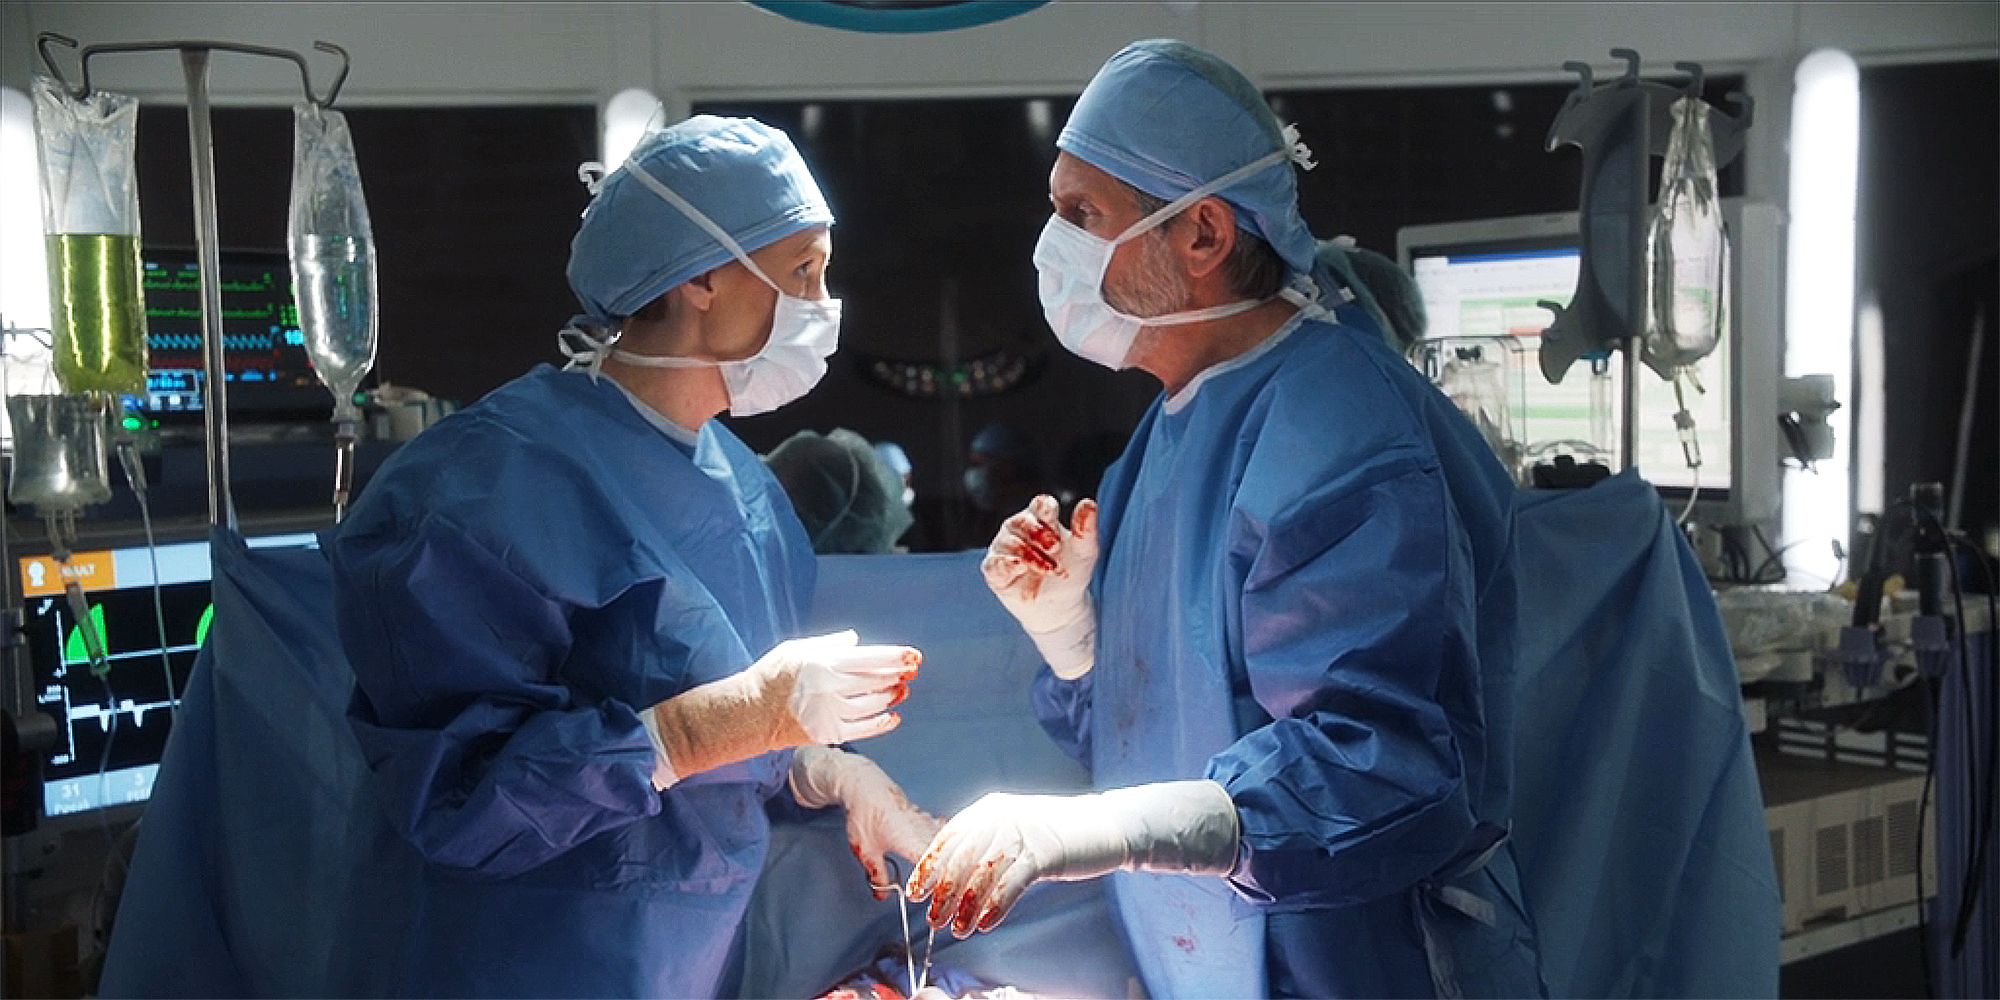 Clara Logan and Alden Parker stand in operating room with blood on their gloved hands